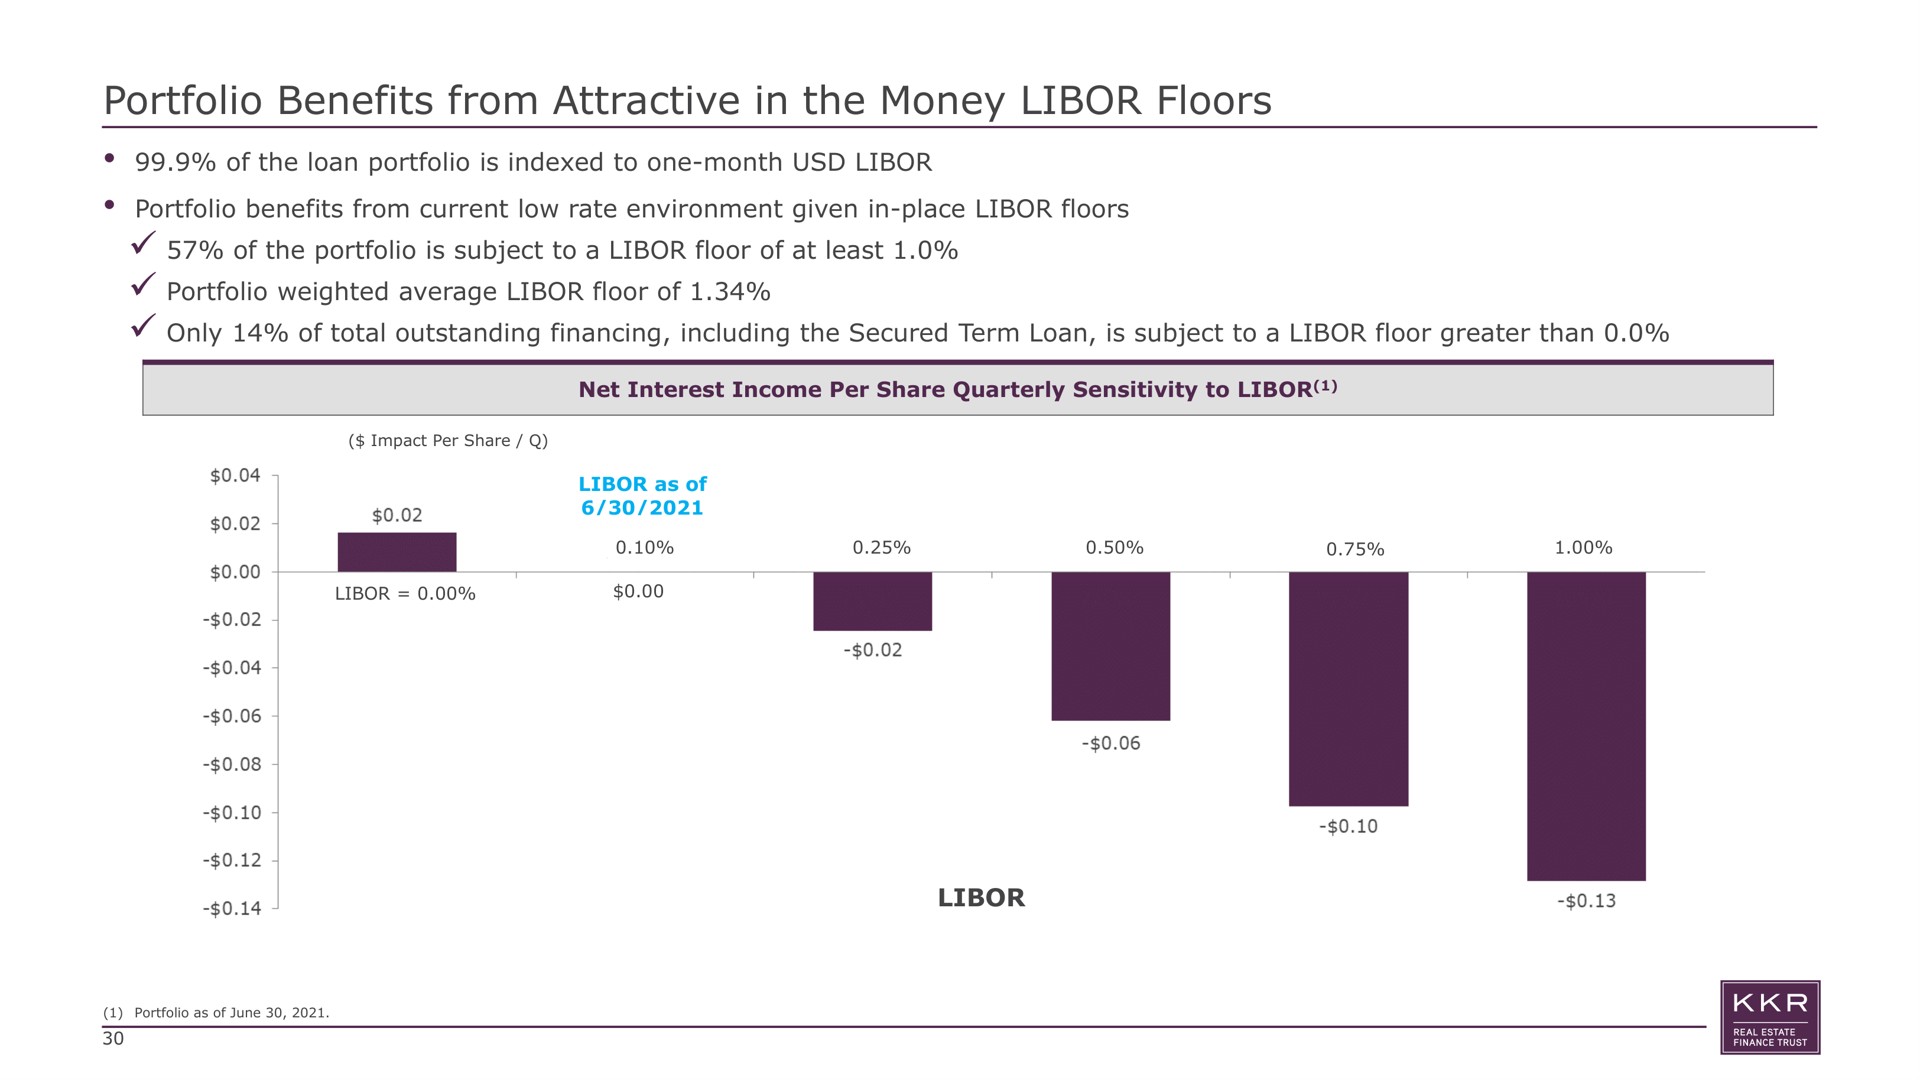 portfolio benefits from attractive in the money floors of the loan portfolio is indexed to one month portfolio benefits from current low rate environment given in place floors of the portfolio is subject to a floor of at least portfolio weighted average floor of only of total outstanding financing including the secured term loan is subject to a floor greater than as finance trust | KKR Real Estate Finance Trust